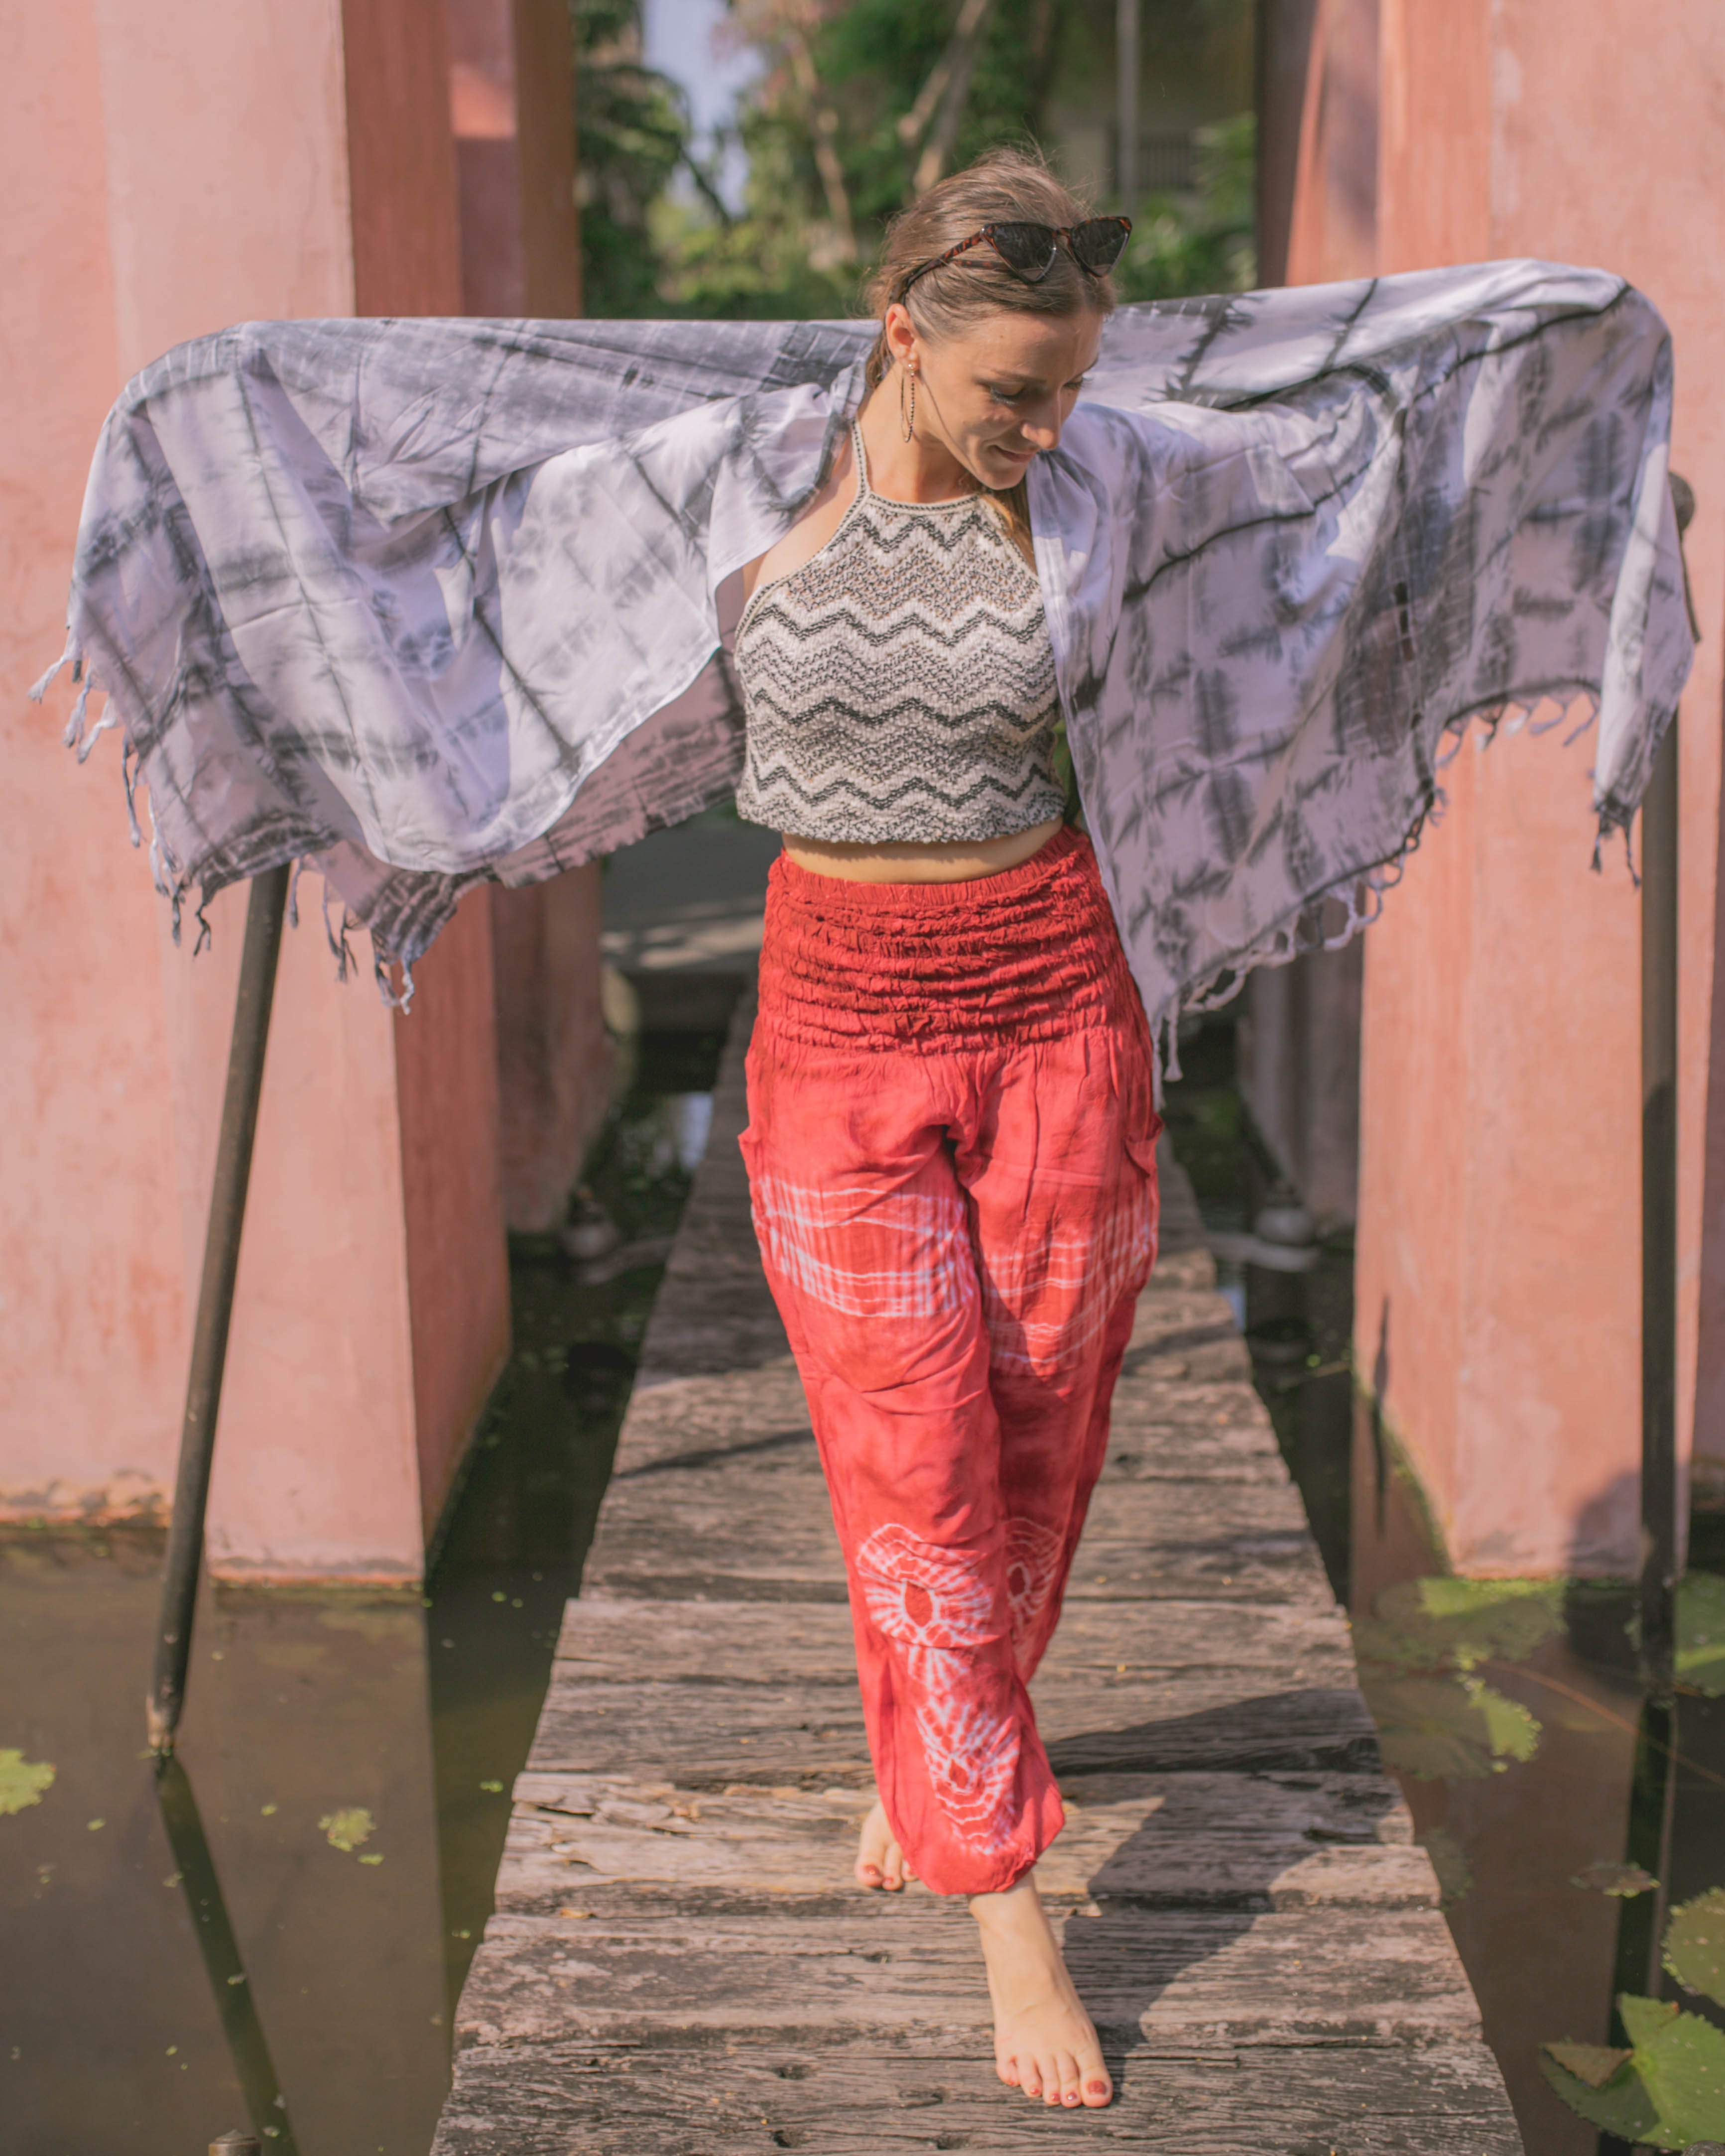 Beachwear - Buy Today Elephant Pants Jewelry And Bohemian Clothes Handmade In Thailand Help To Save The Elephants FairTrade And Vegan